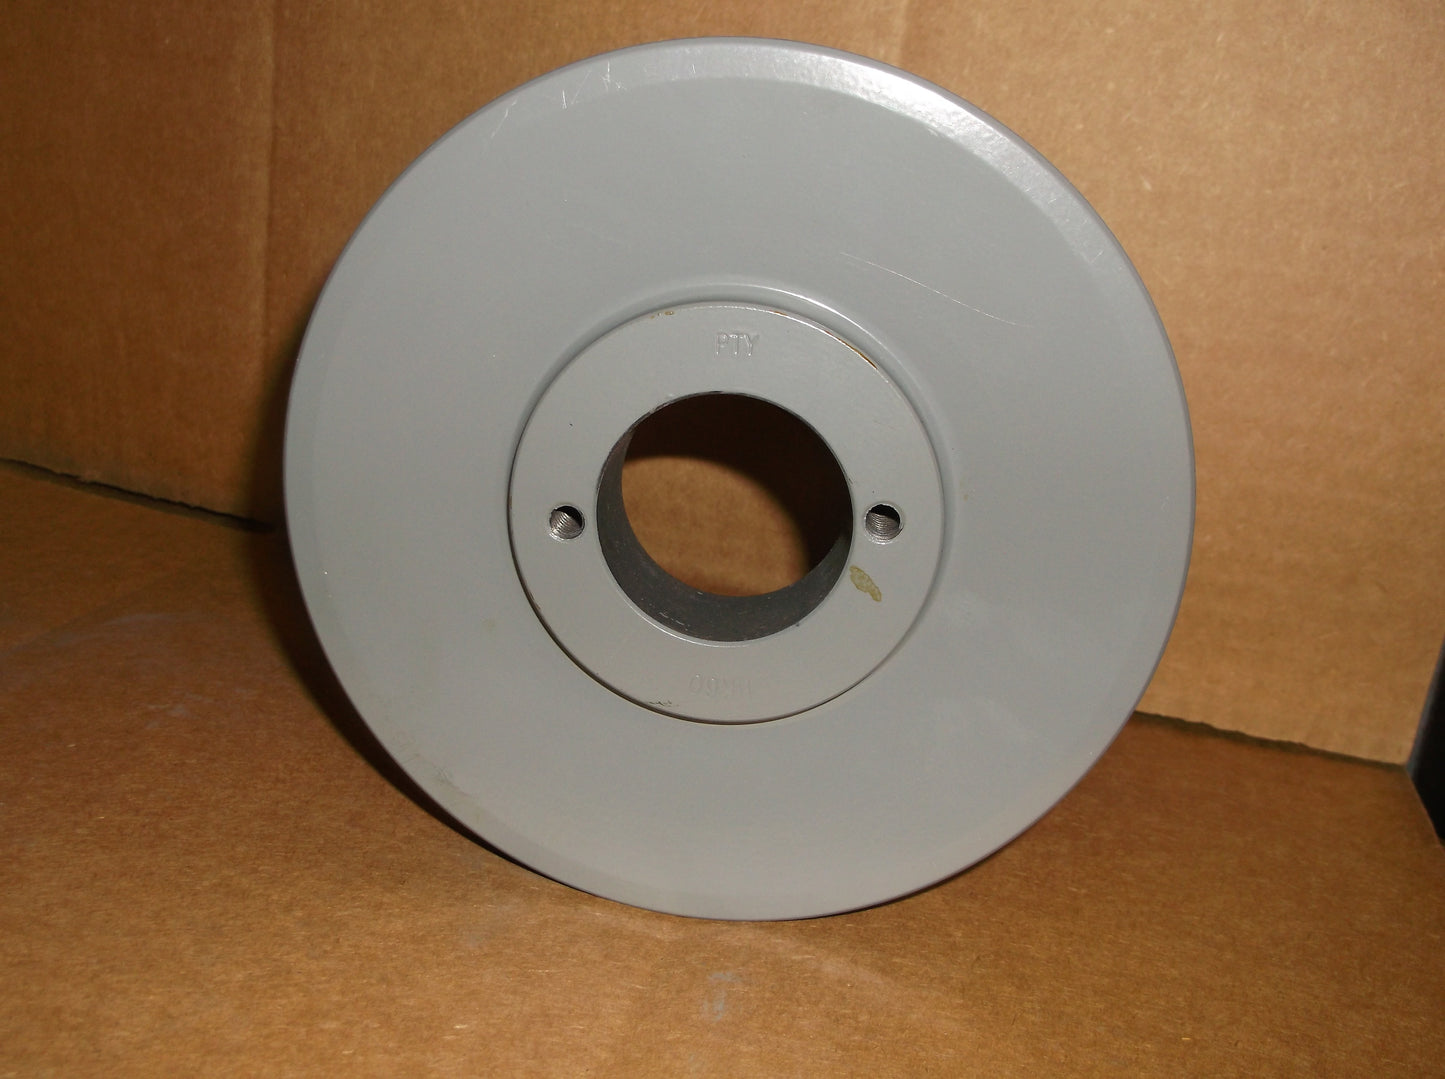 5-3/4" DIAMETER FIXED SINGLE GROOVE PULLEY LESS "H" STYLE BUSHING FOR BORE